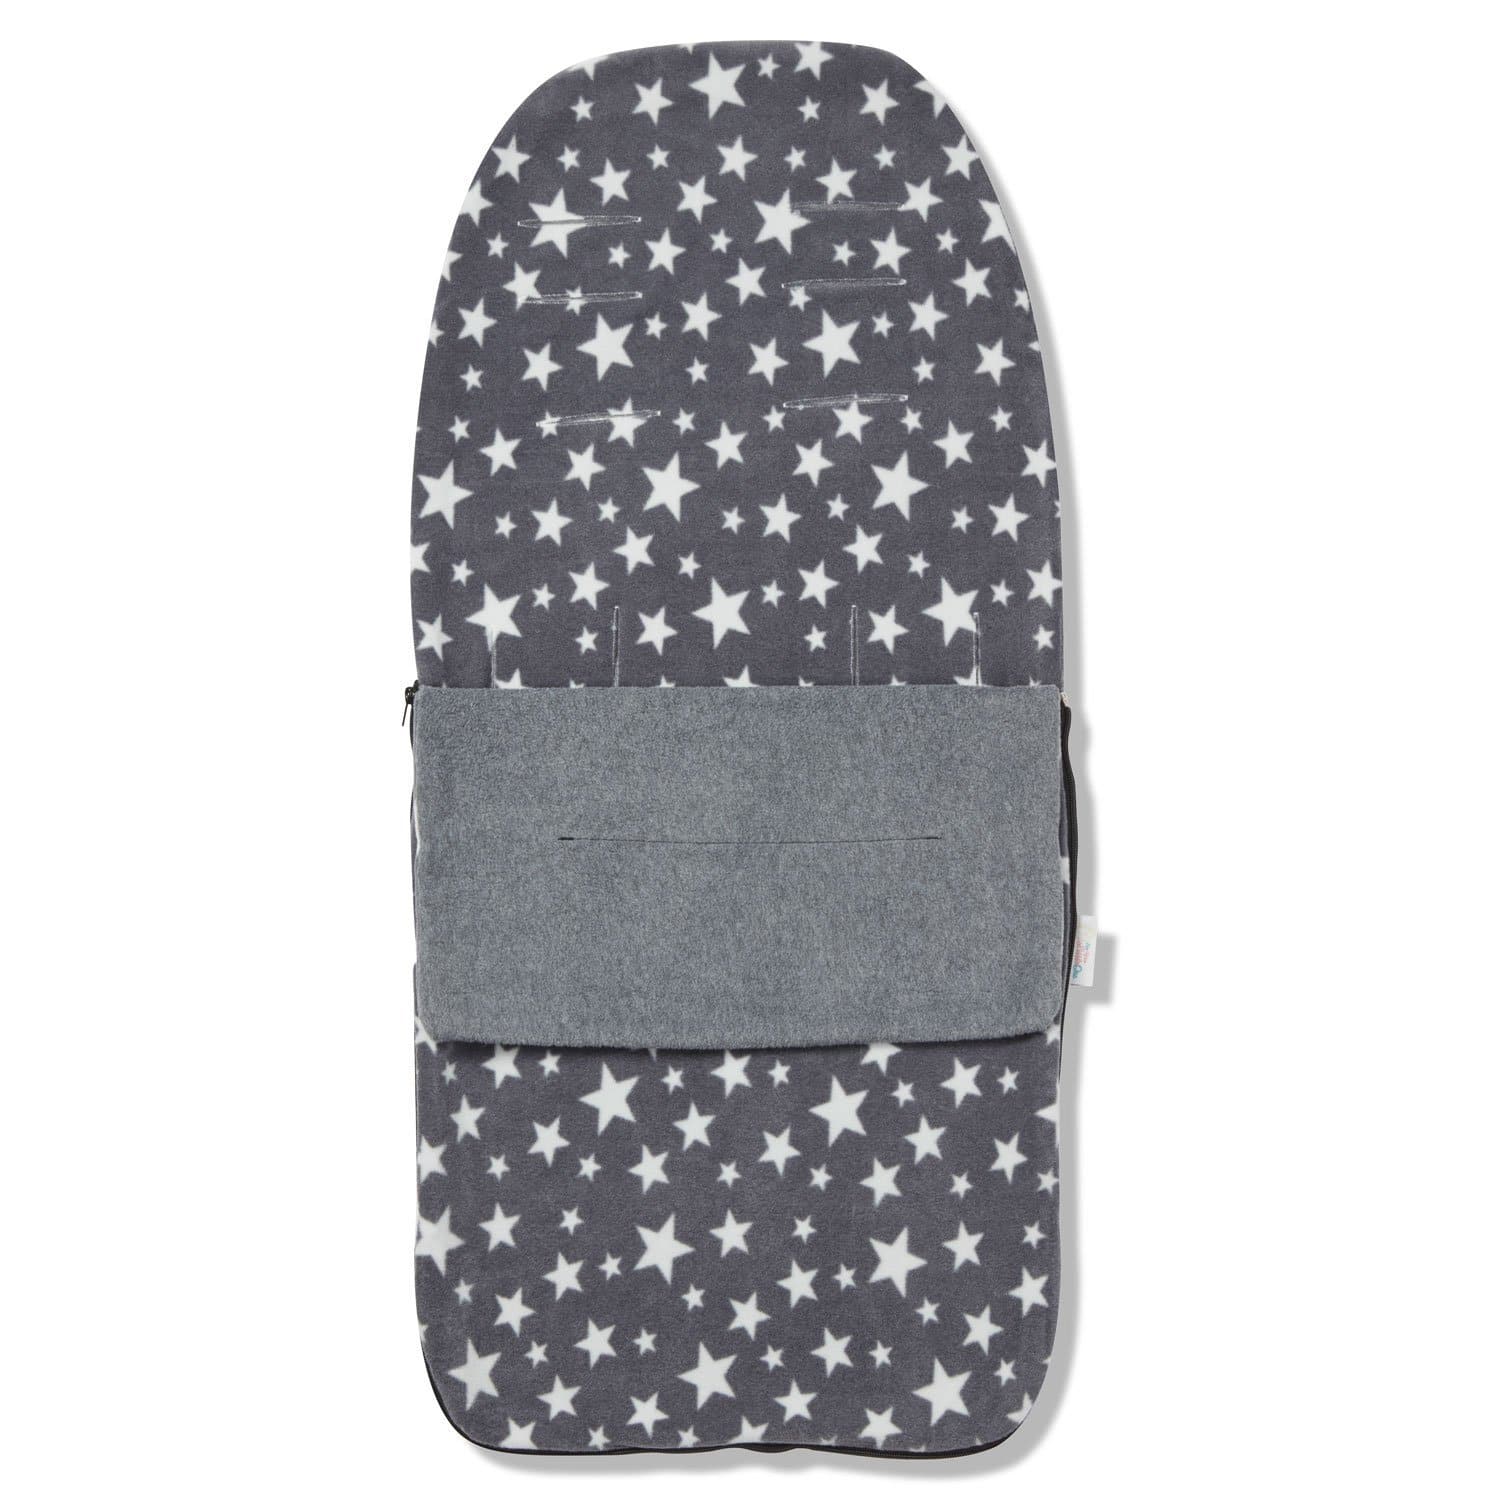 Snuggle Summer Footmuff Compatible with Inglesina - Grey Star / Fits All Models | For Your Little One